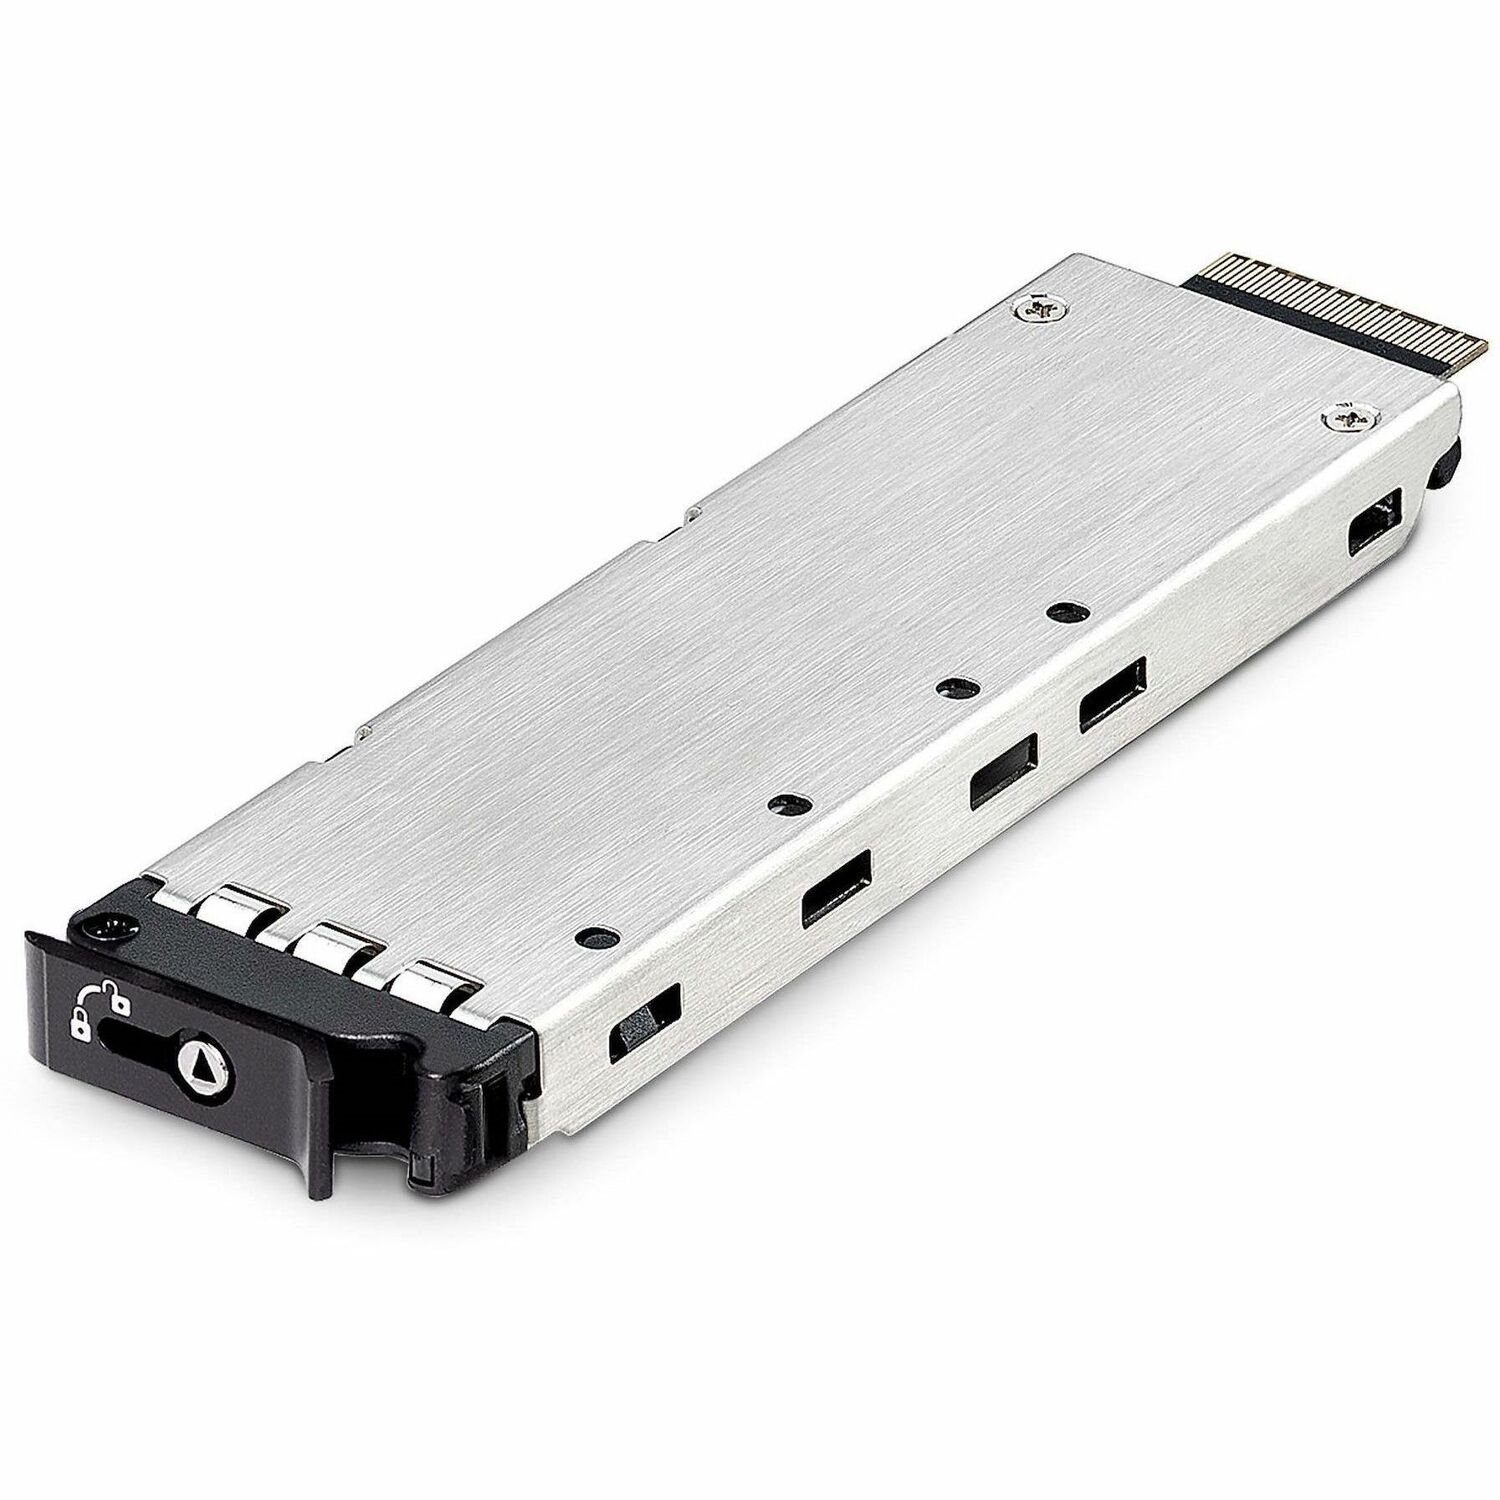 StarTech.com M.2 NVMe SSD Drive Tray for use in PCIe Expansion Product Series, Drive Tray for an Additional Hot Swappable Drive